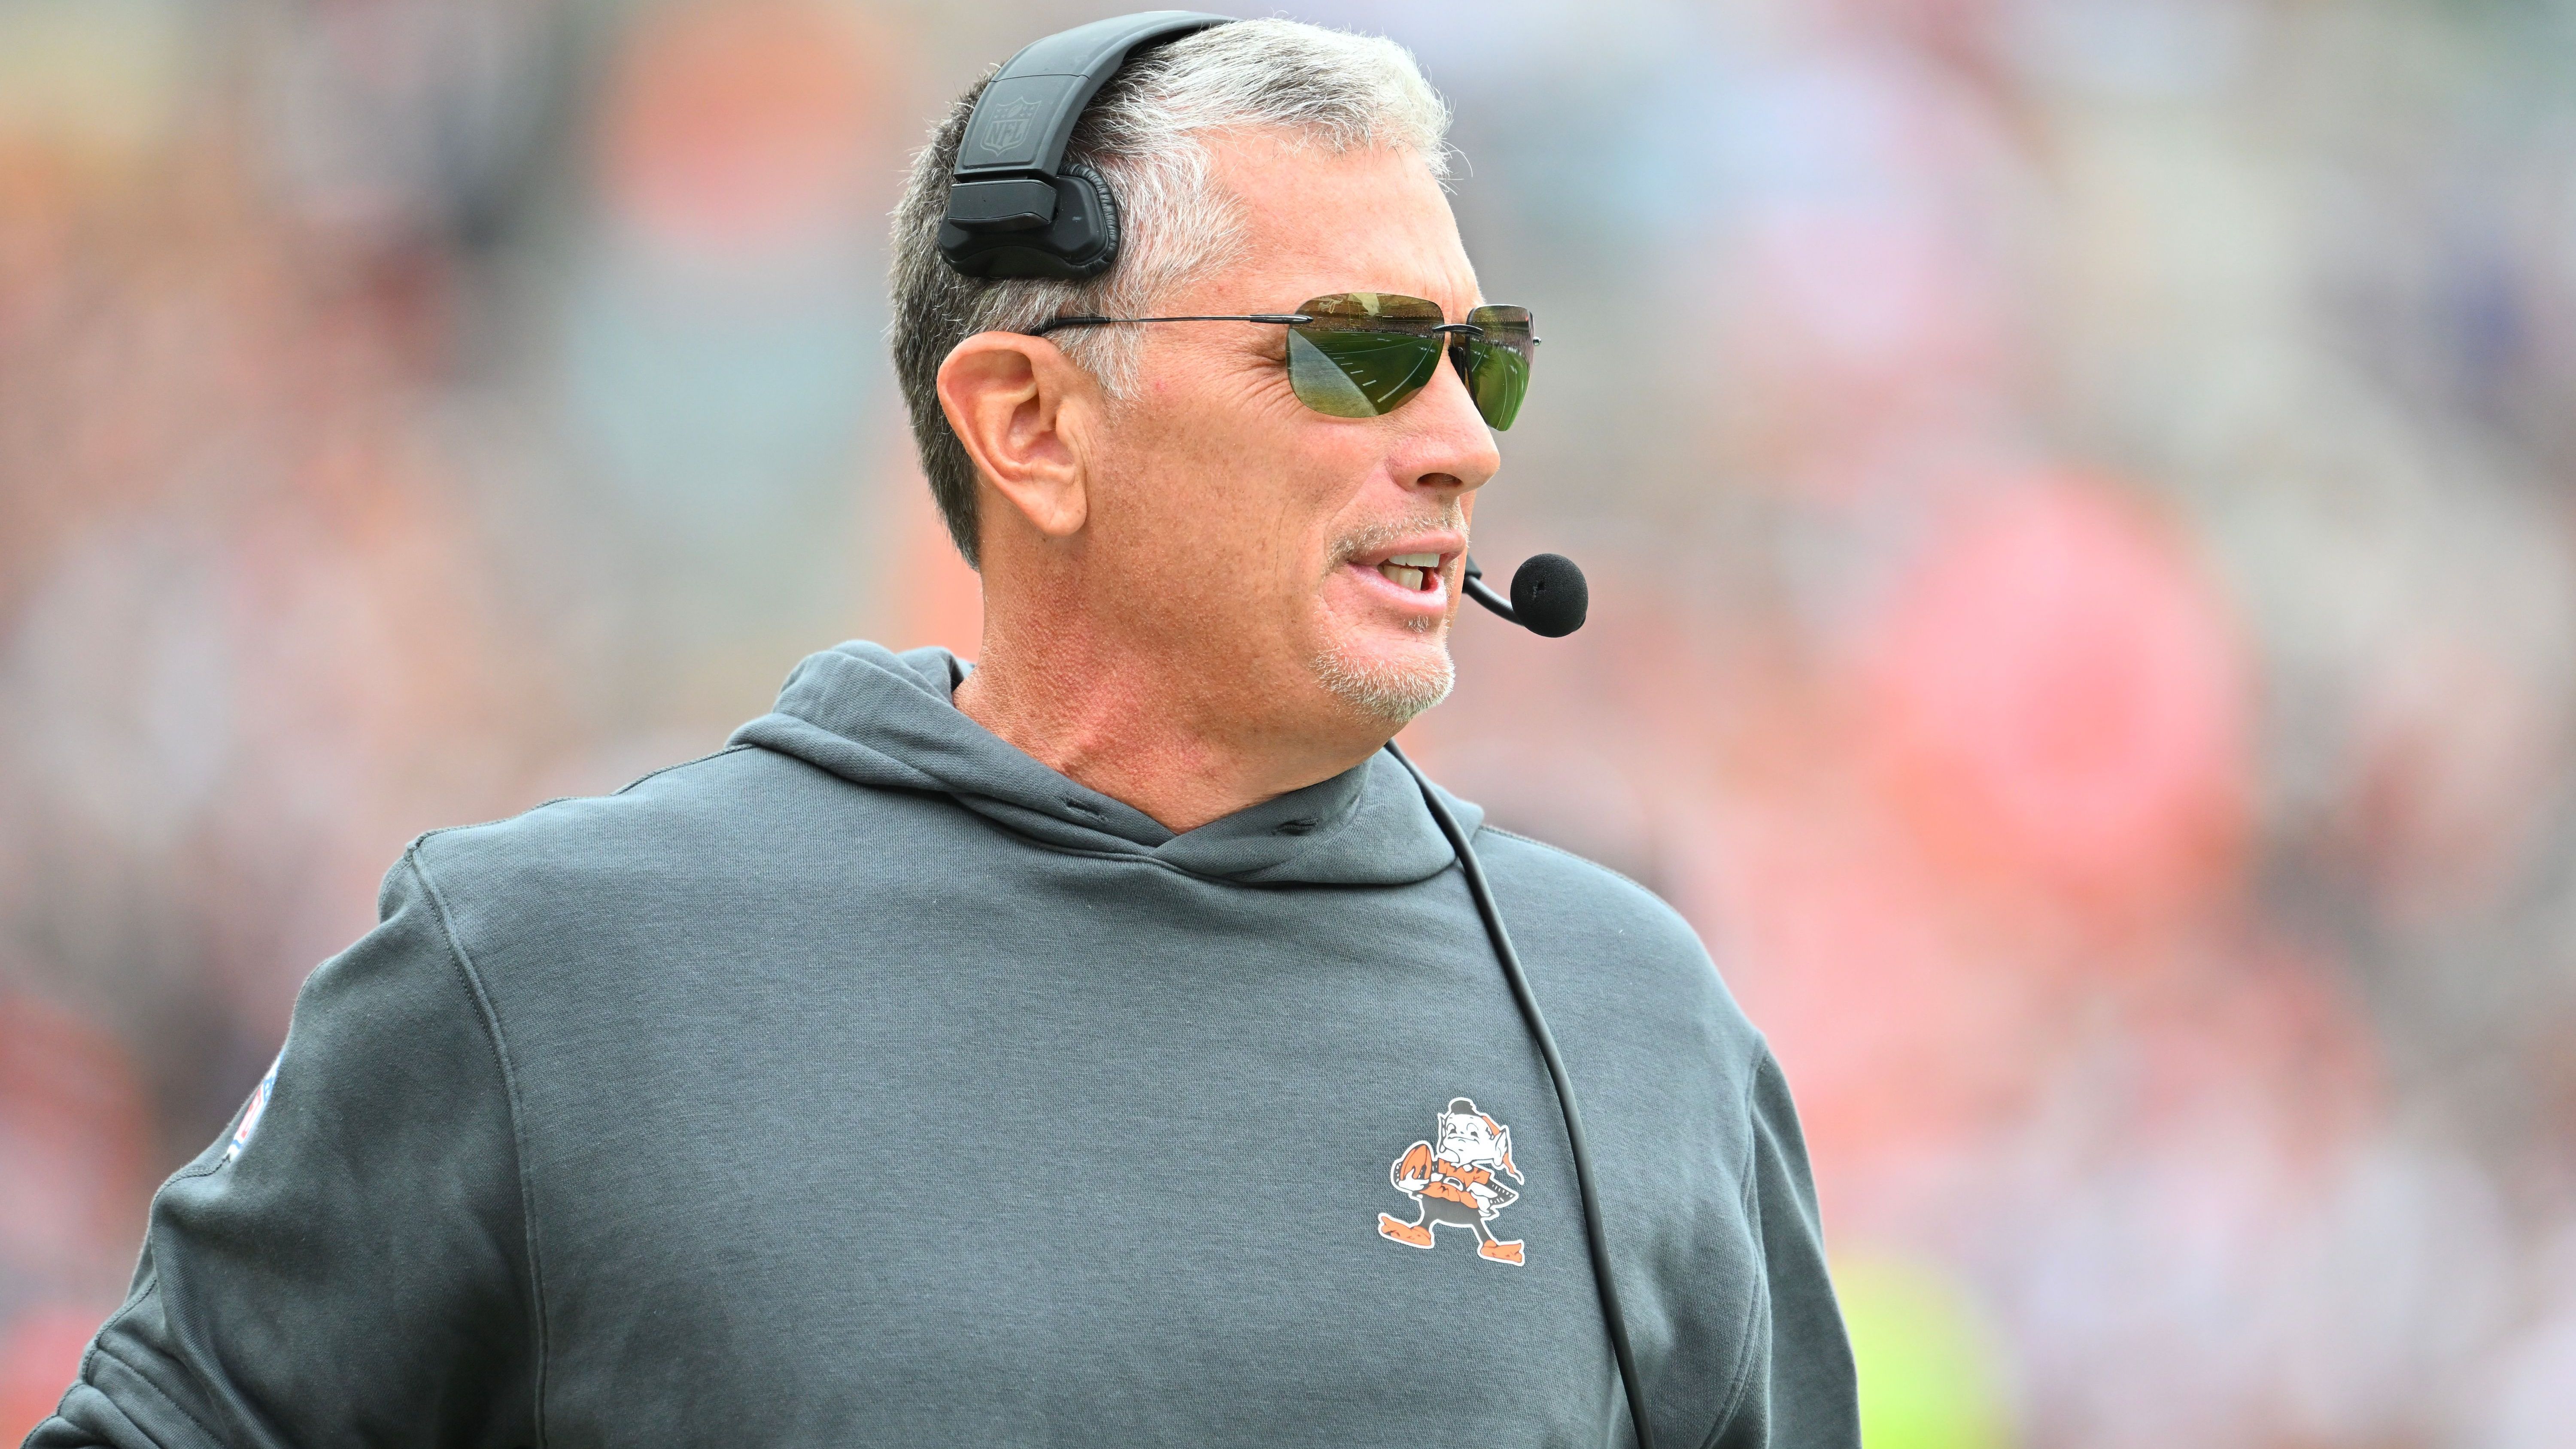 <strong>Assistant Coach of the Year</strong><br>Jim Schwartz, Cleveland Browns, Defensive Coordinator<br><strong>Wahlergebnis mit Punkteabstufung 5-3-1:</strong> <br>1. Schwartz, 25-10-5 = 160<br>2. Mike MacDonald,&nbsp;Defensive Coordinator, Ravens,  11-11-6 = 94<br>3. Ben Johnson, Offensive Coordinator, Lions 6-10-5 = 65<br>4. Bobby Slowik, Offensive Coordinator, Texans, 4-7-12 = 53<br>5. Todd Monken, Offensive Coordinator, Ravens, 3-8-7 = 46